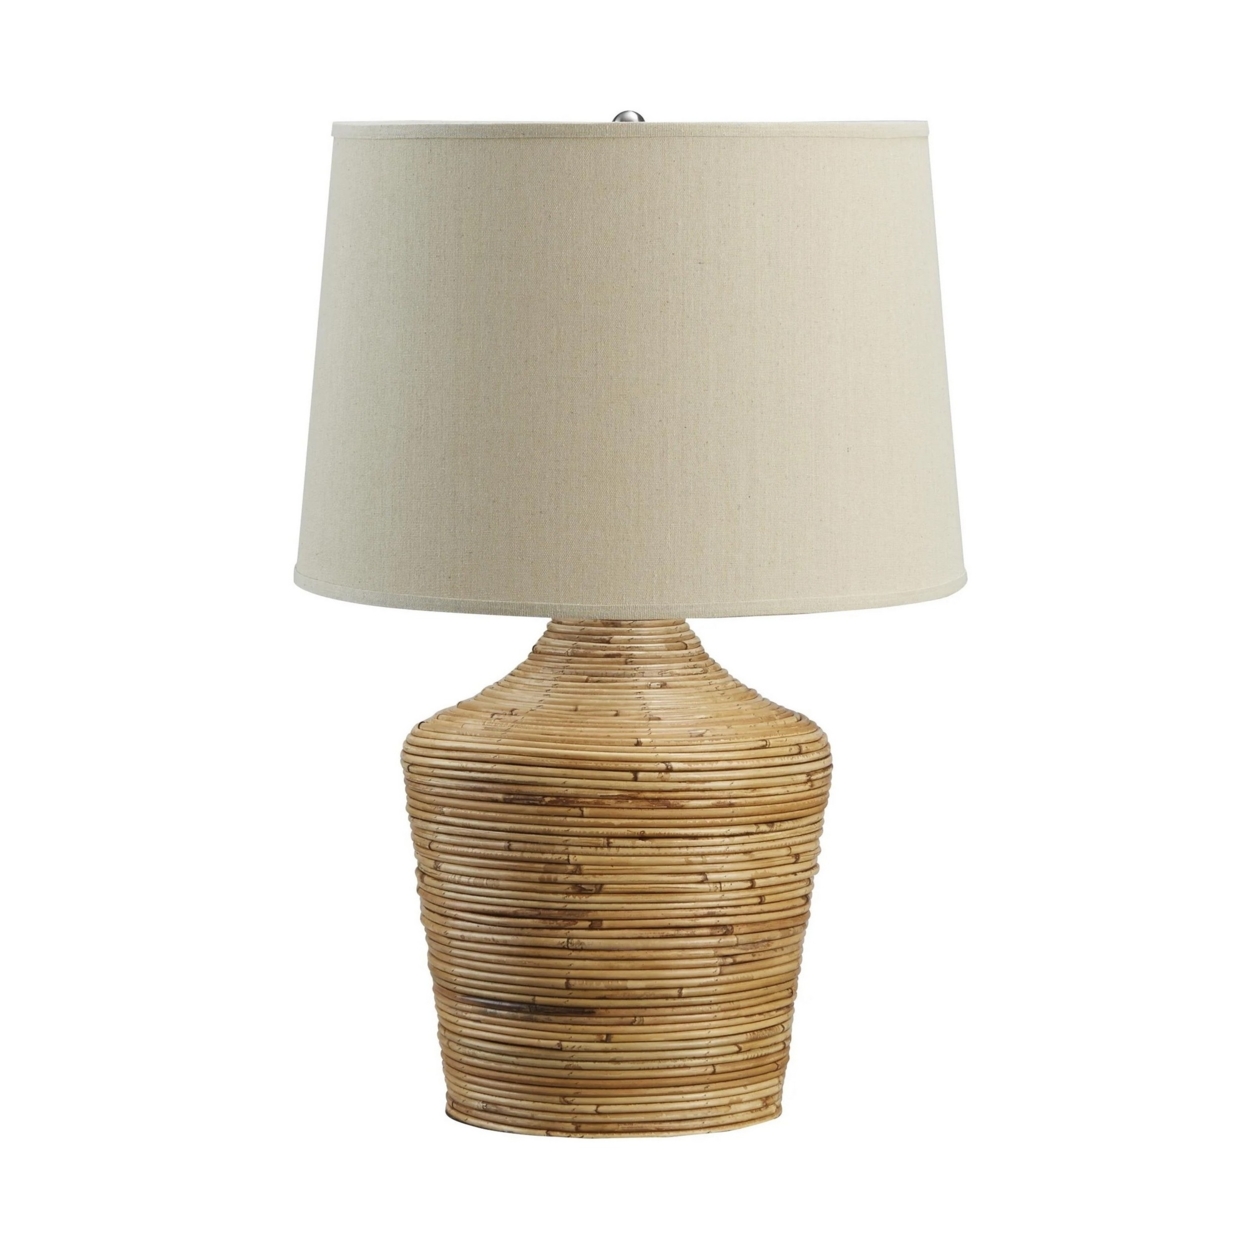 26 Inch Cottage Table Lamp, Metal And Rattan Base, White Fabric Drum Shade- Saltoro Sherpi